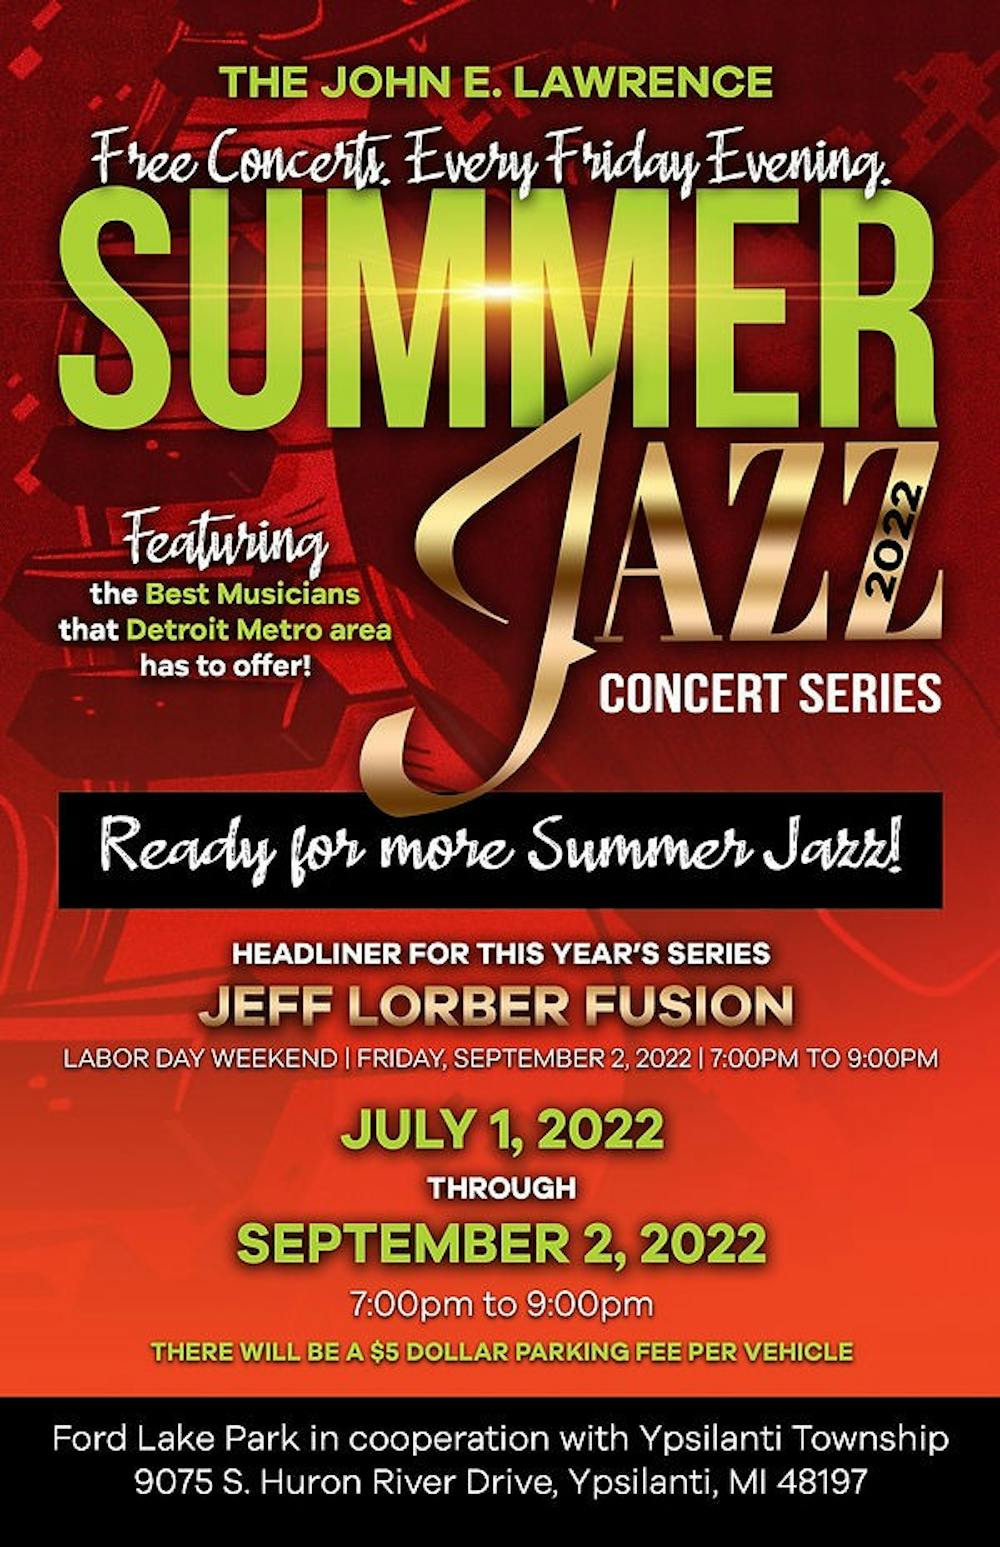 The John E. Lawrence Summer Jazz Concert Series returns to Ypsilanti this summer